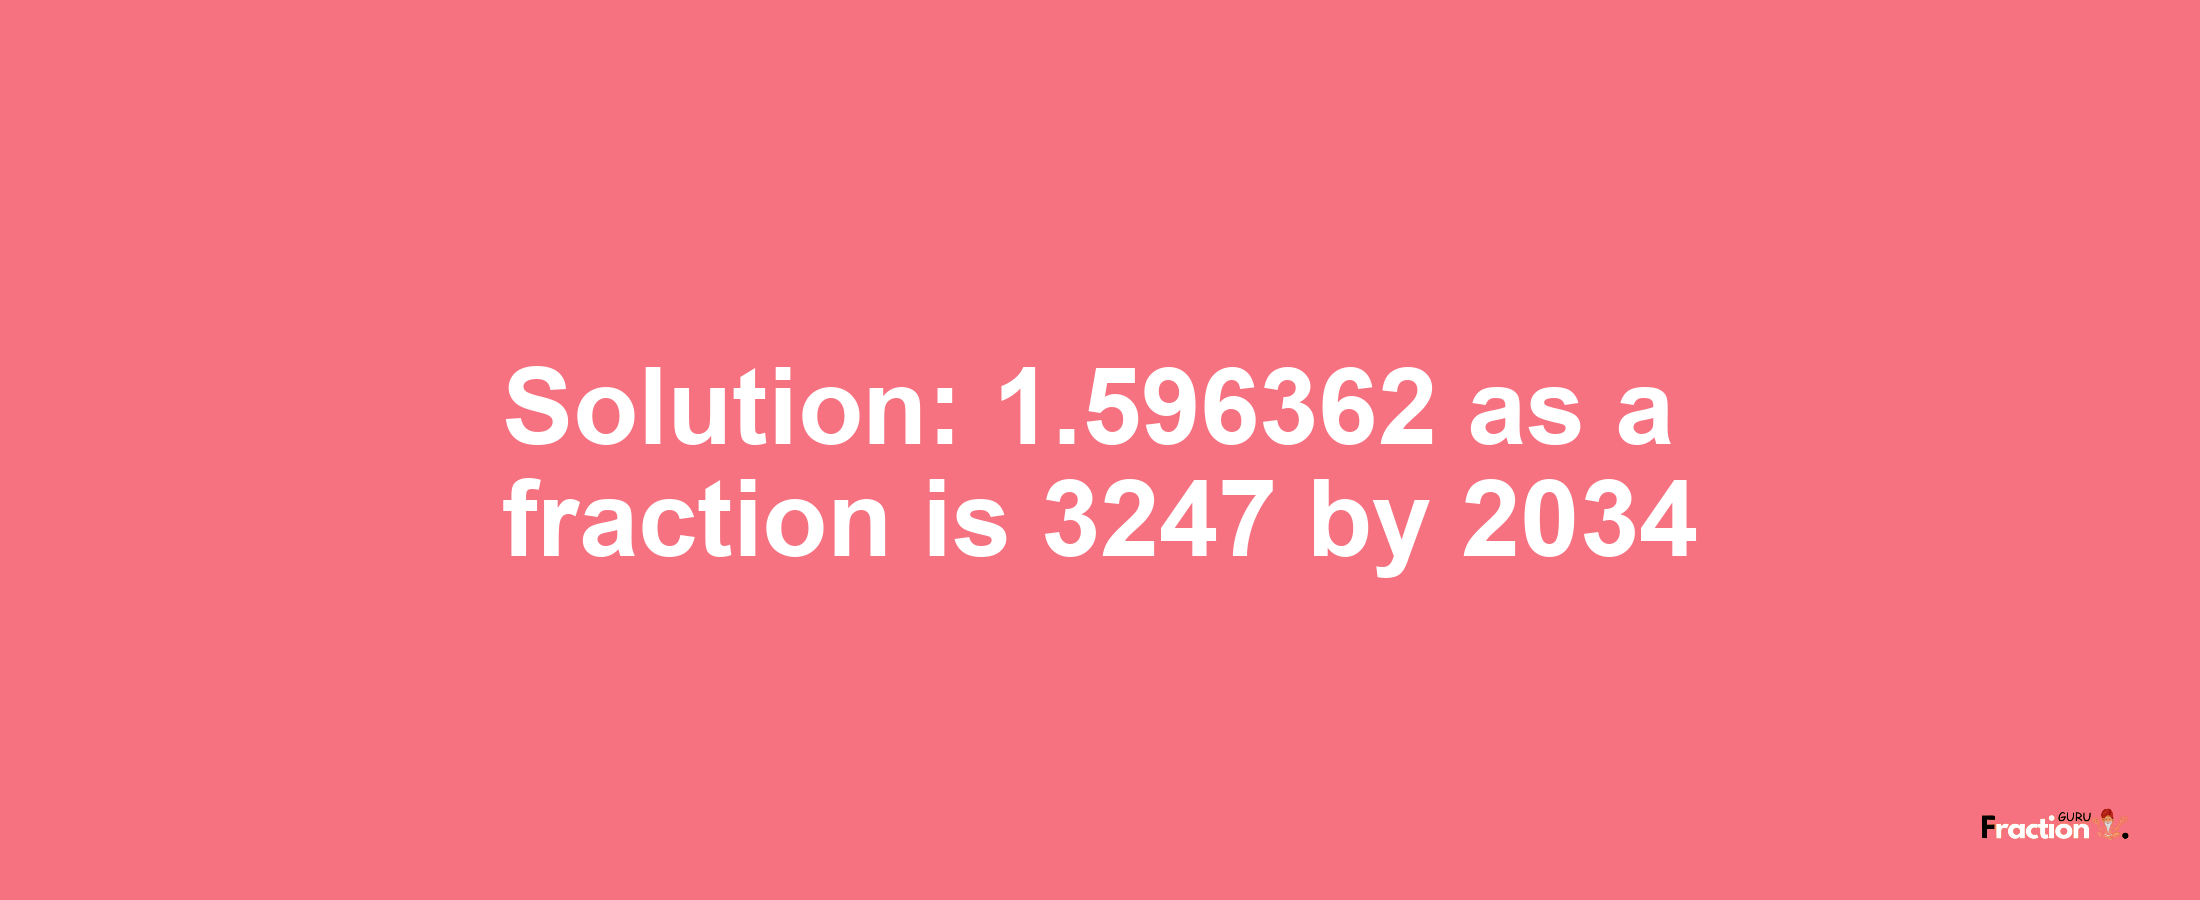 Solution:1.596362 as a fraction is 3247/2034